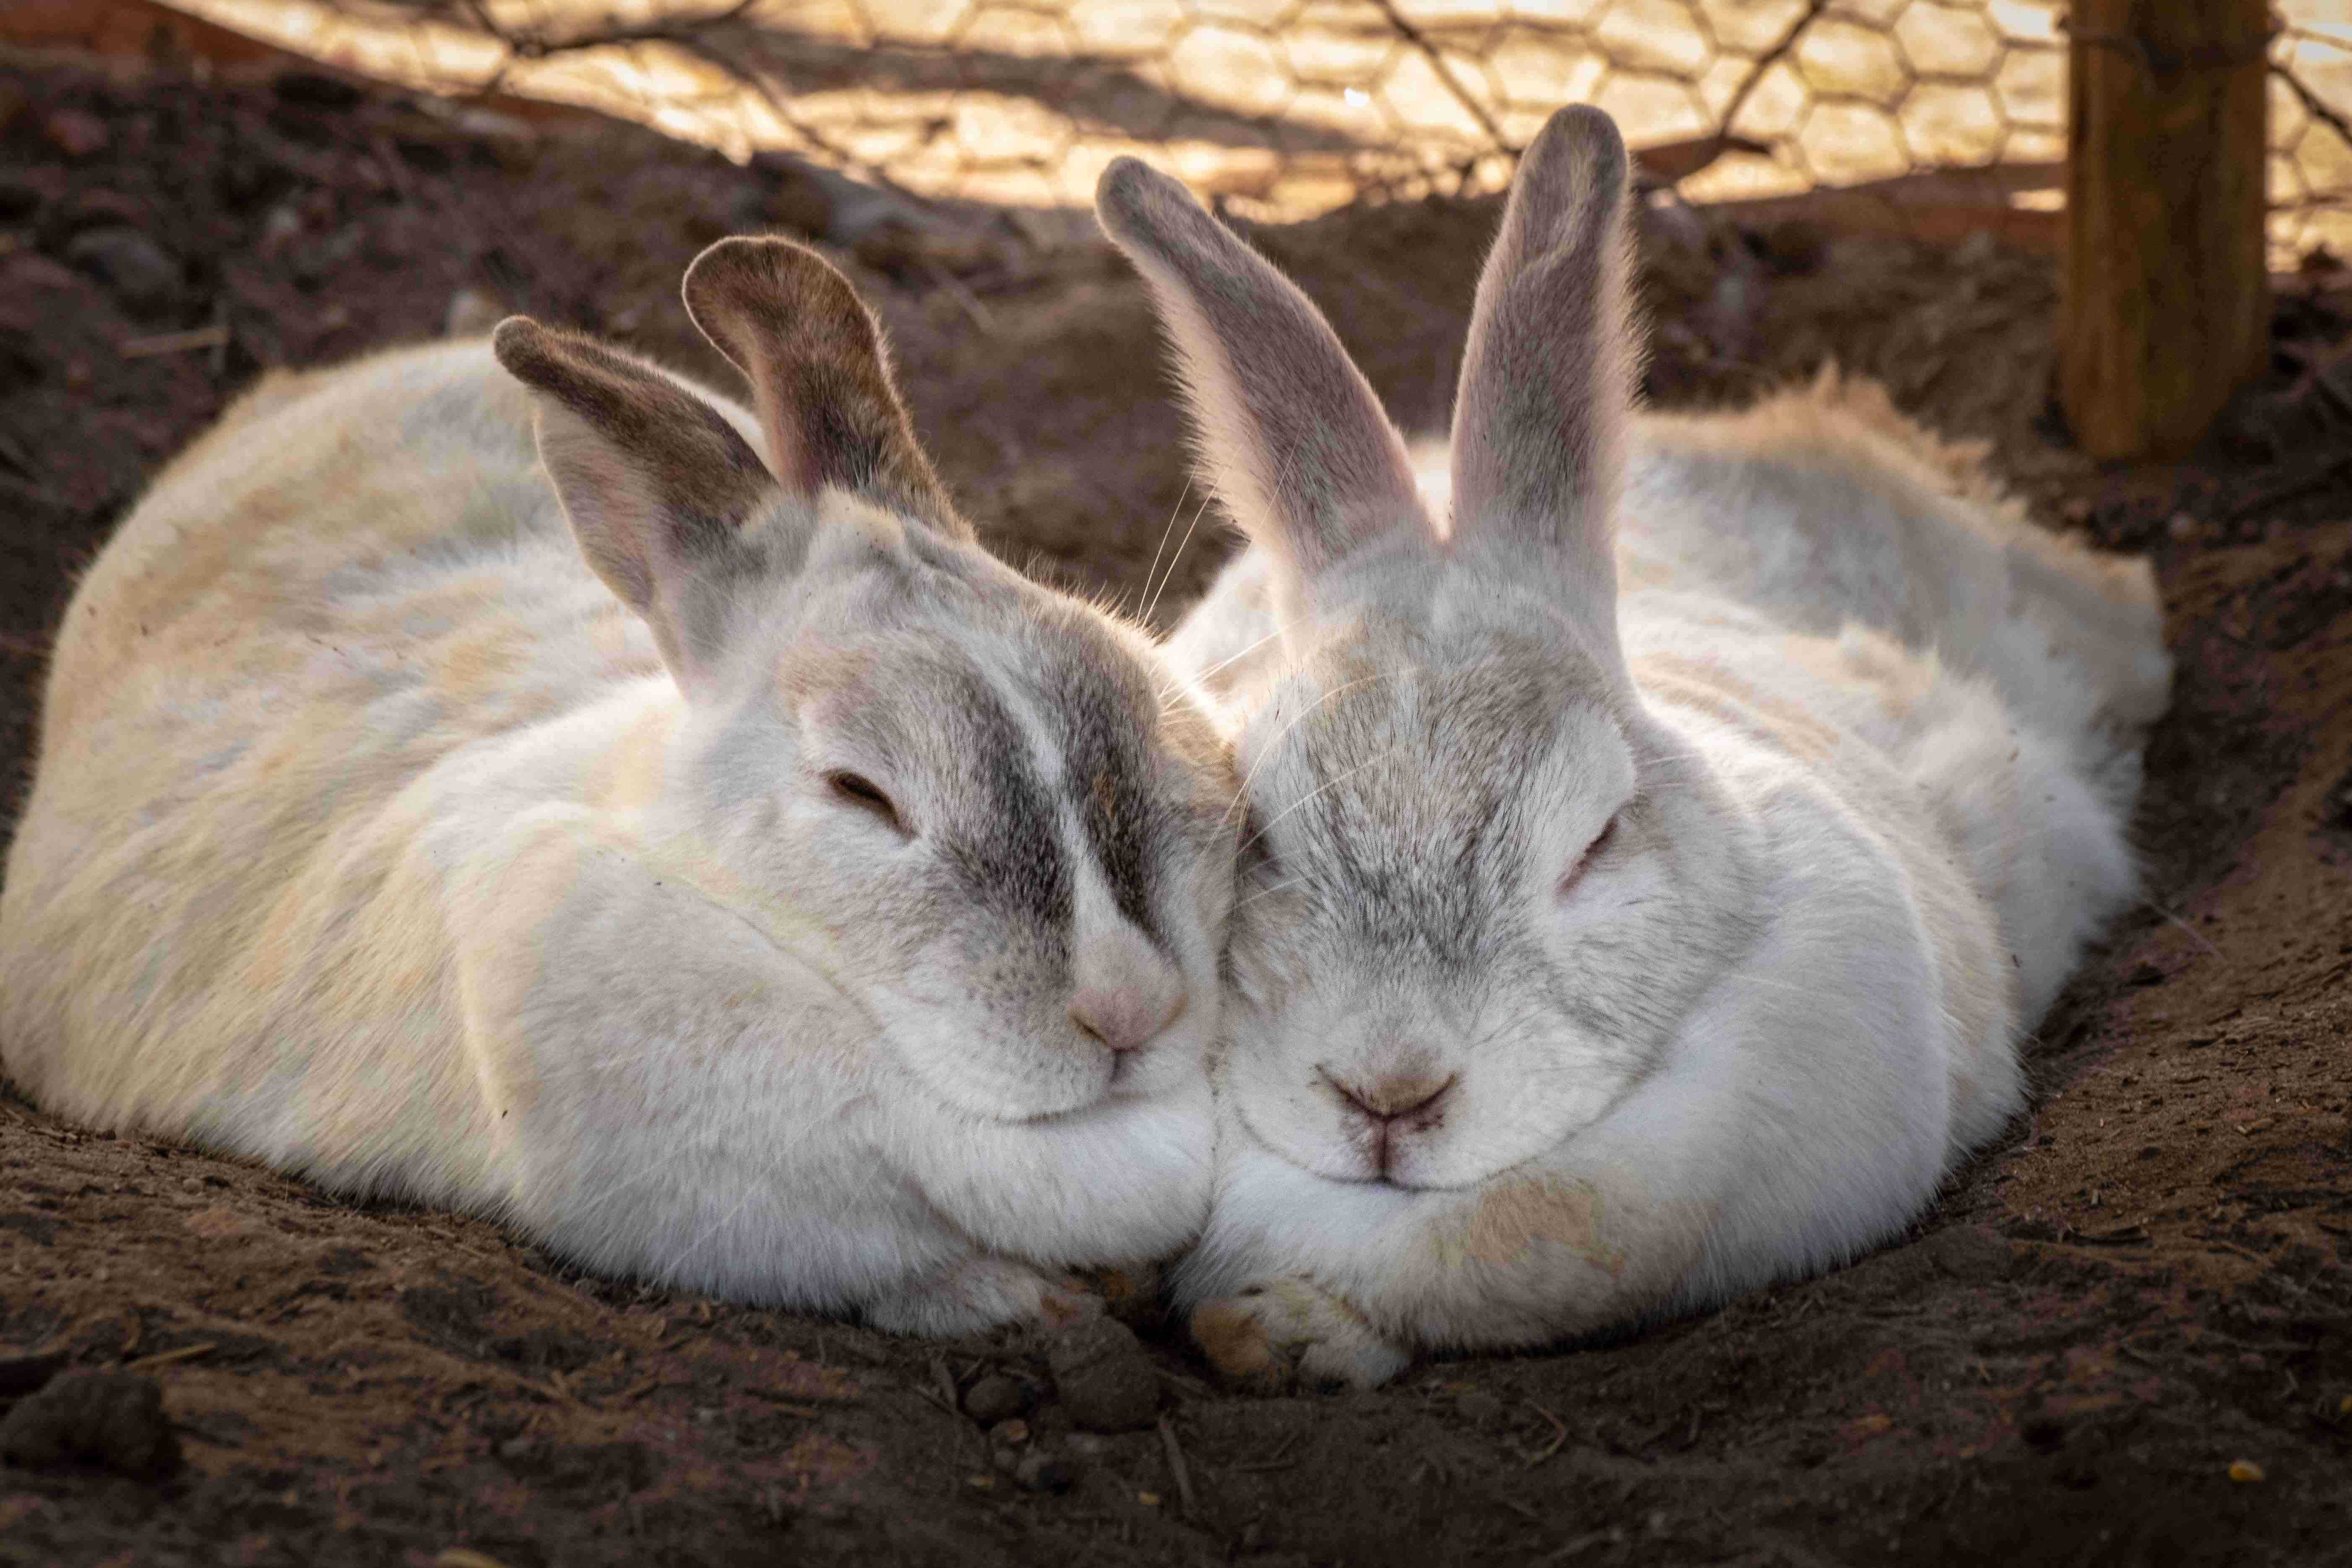 Protecting Your Bunny: Tips to Prevent Liver Problems in Rabbits